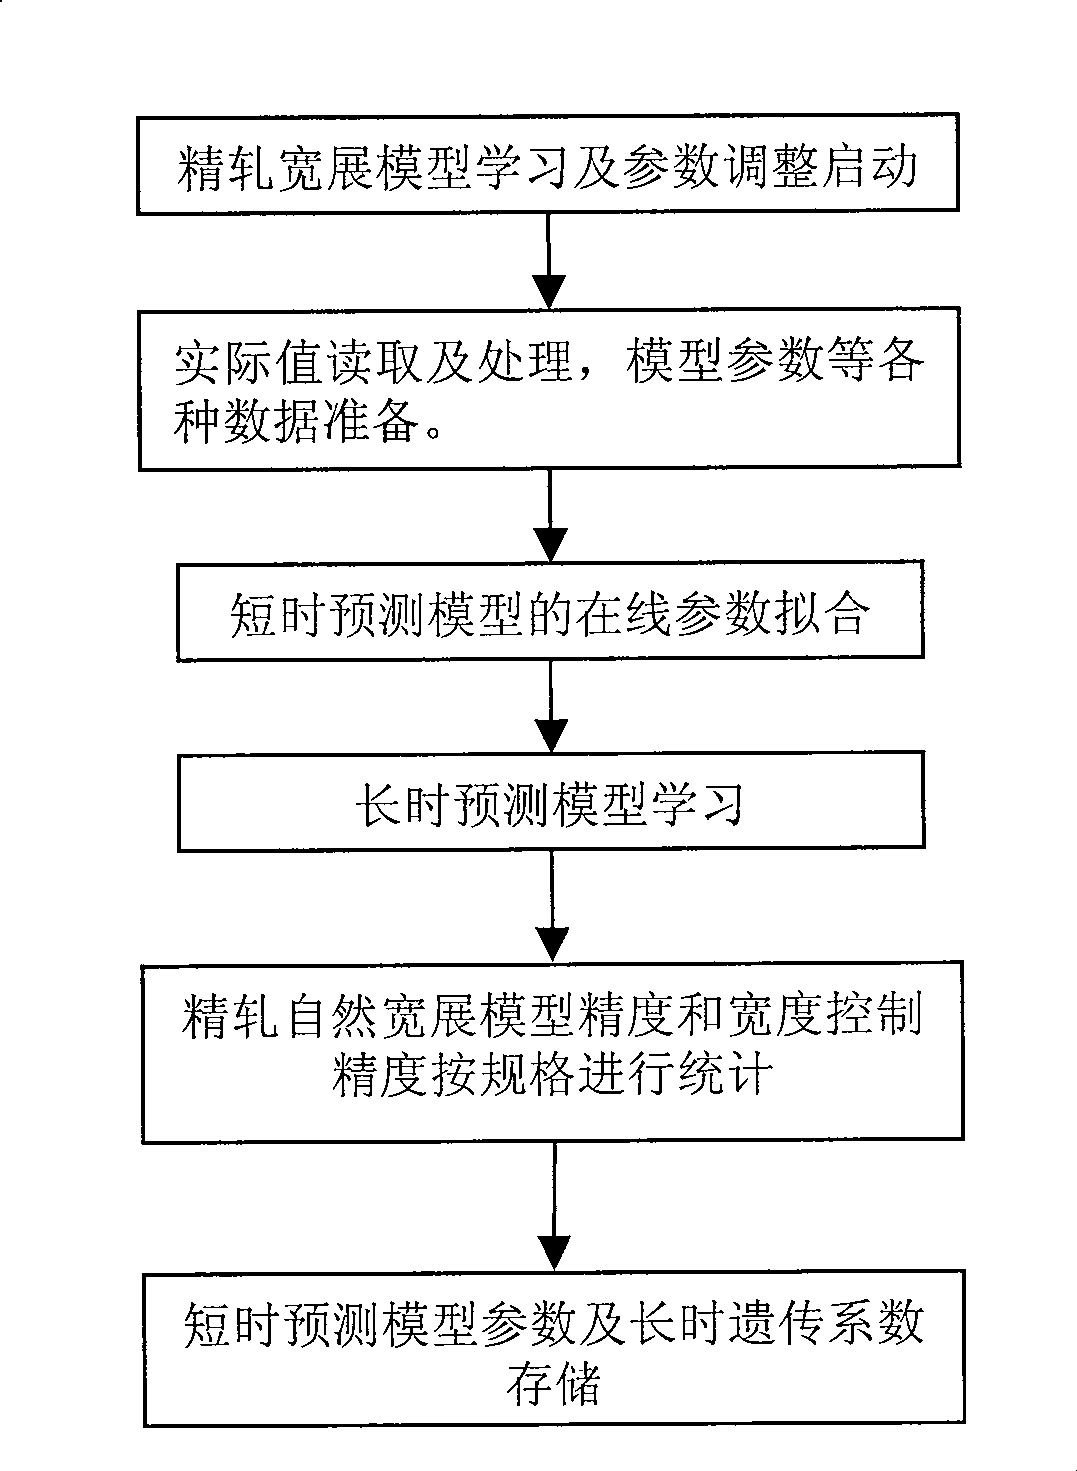 Method for setting up optimized width of rough rolling strip steel